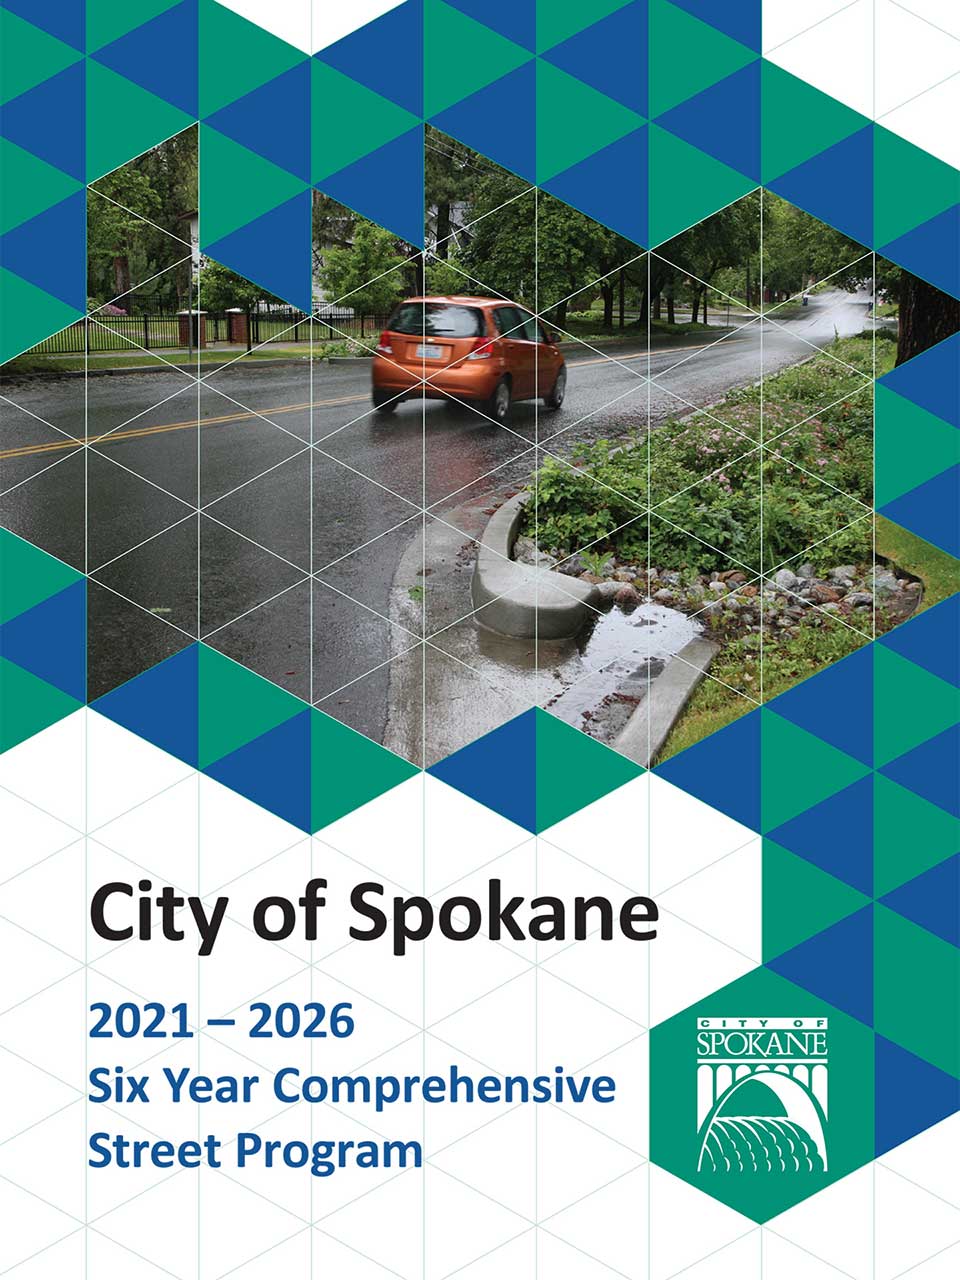 2021-2026 Six Year Comprehensive Street Program Coverpage